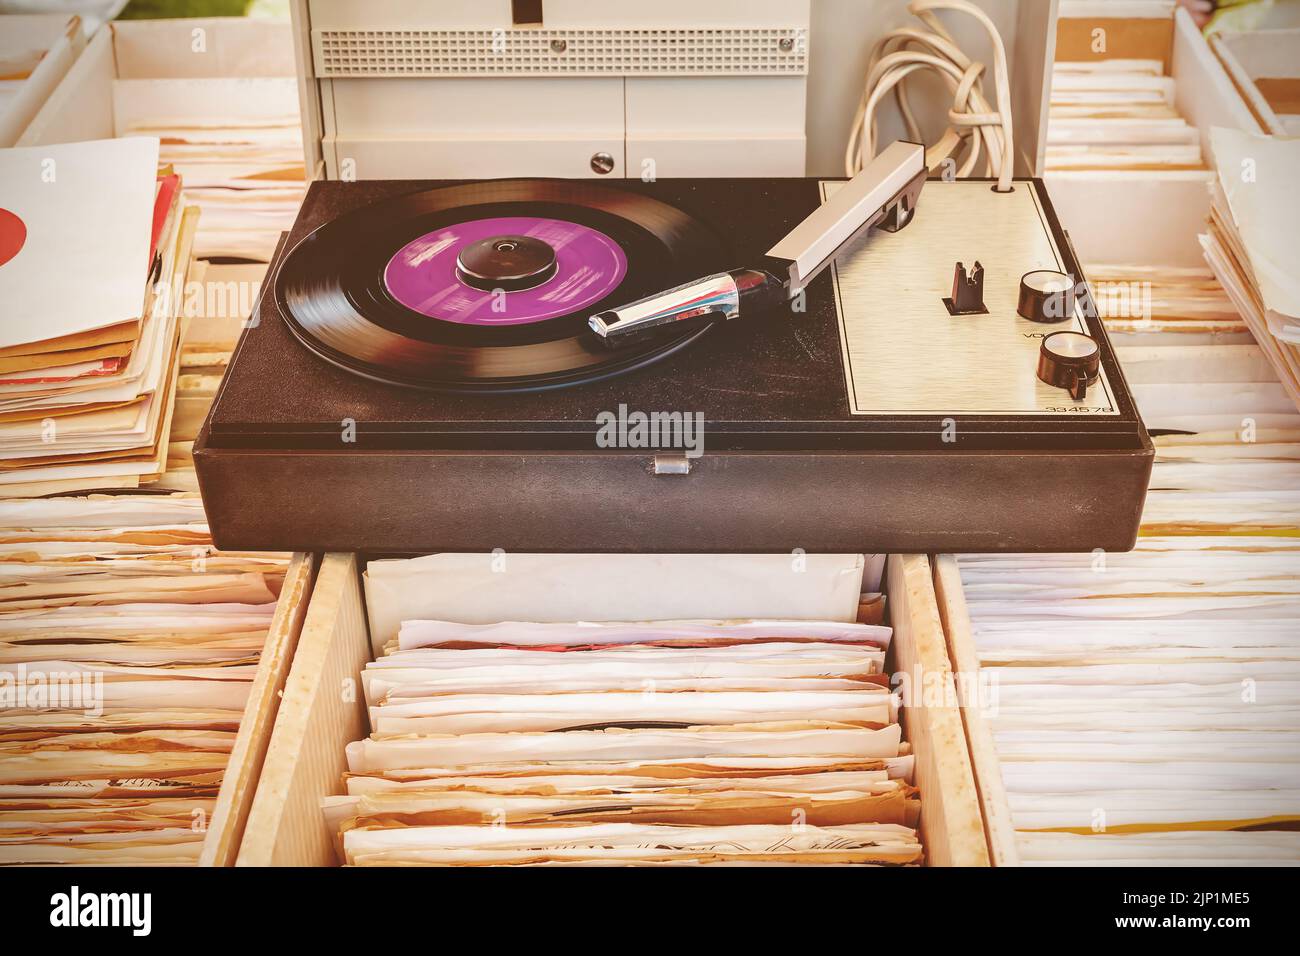 Retro styled image of an old record player on top of used vinyl lp records Stock Photo